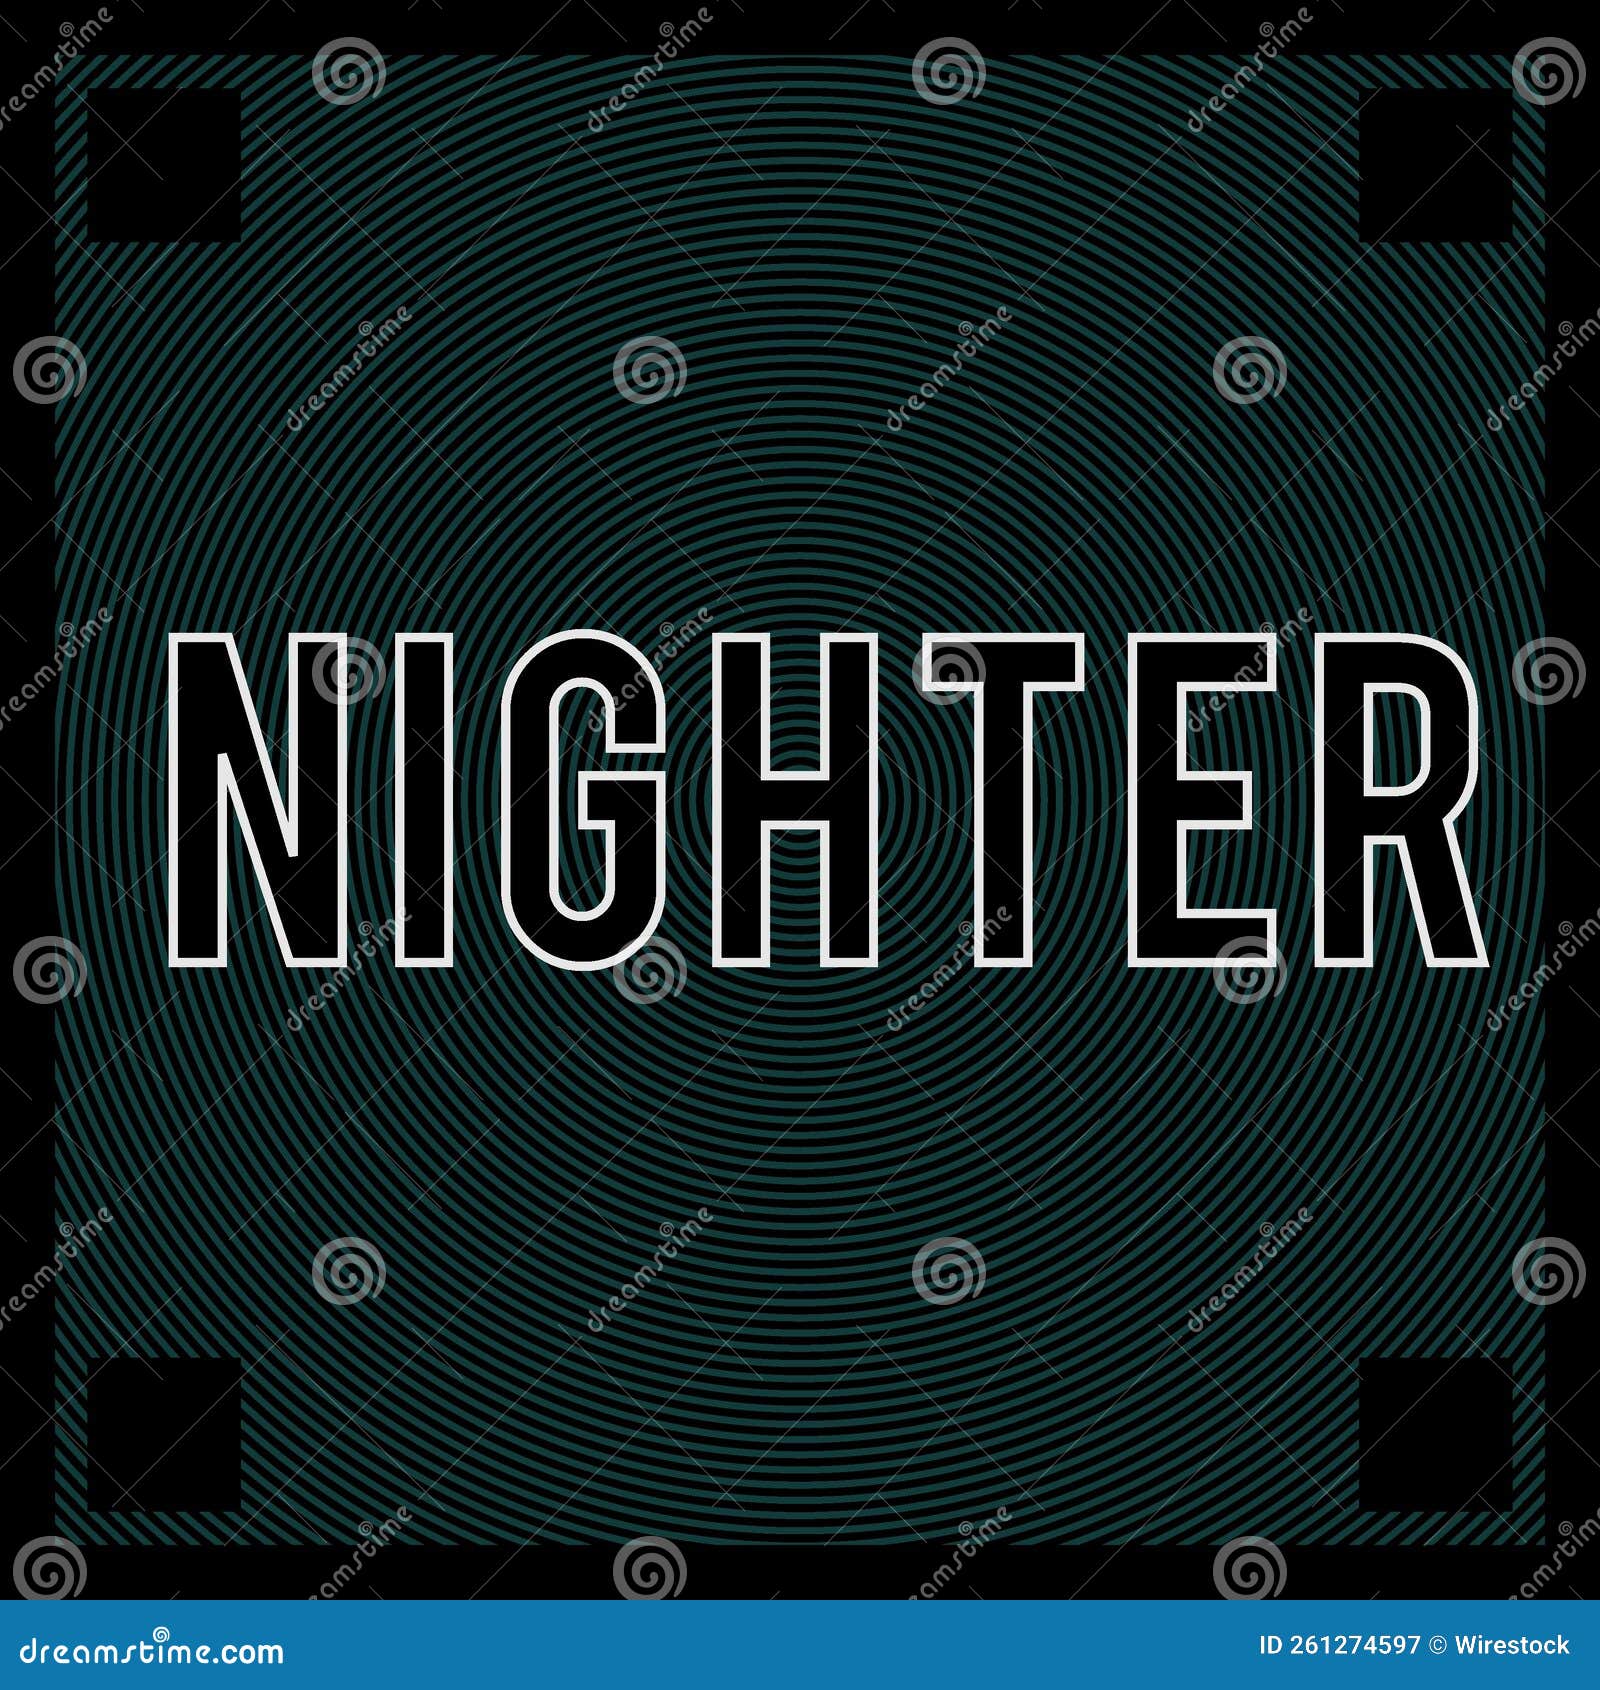 typography  of text that says 'nighter' on a background with green circular lines